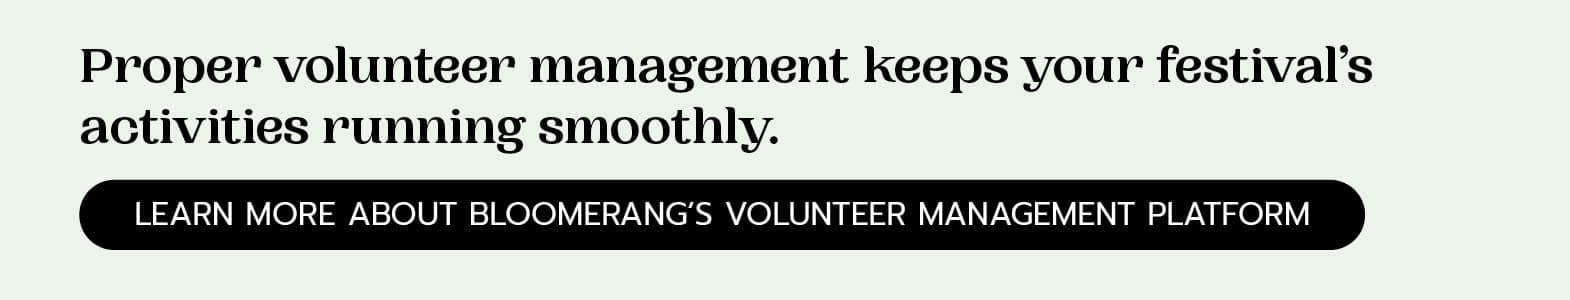 Effective volunteer management software helps keep your music festival activities running smoothly. Learn about Bloomerang's volunteer management platform by clicking here!